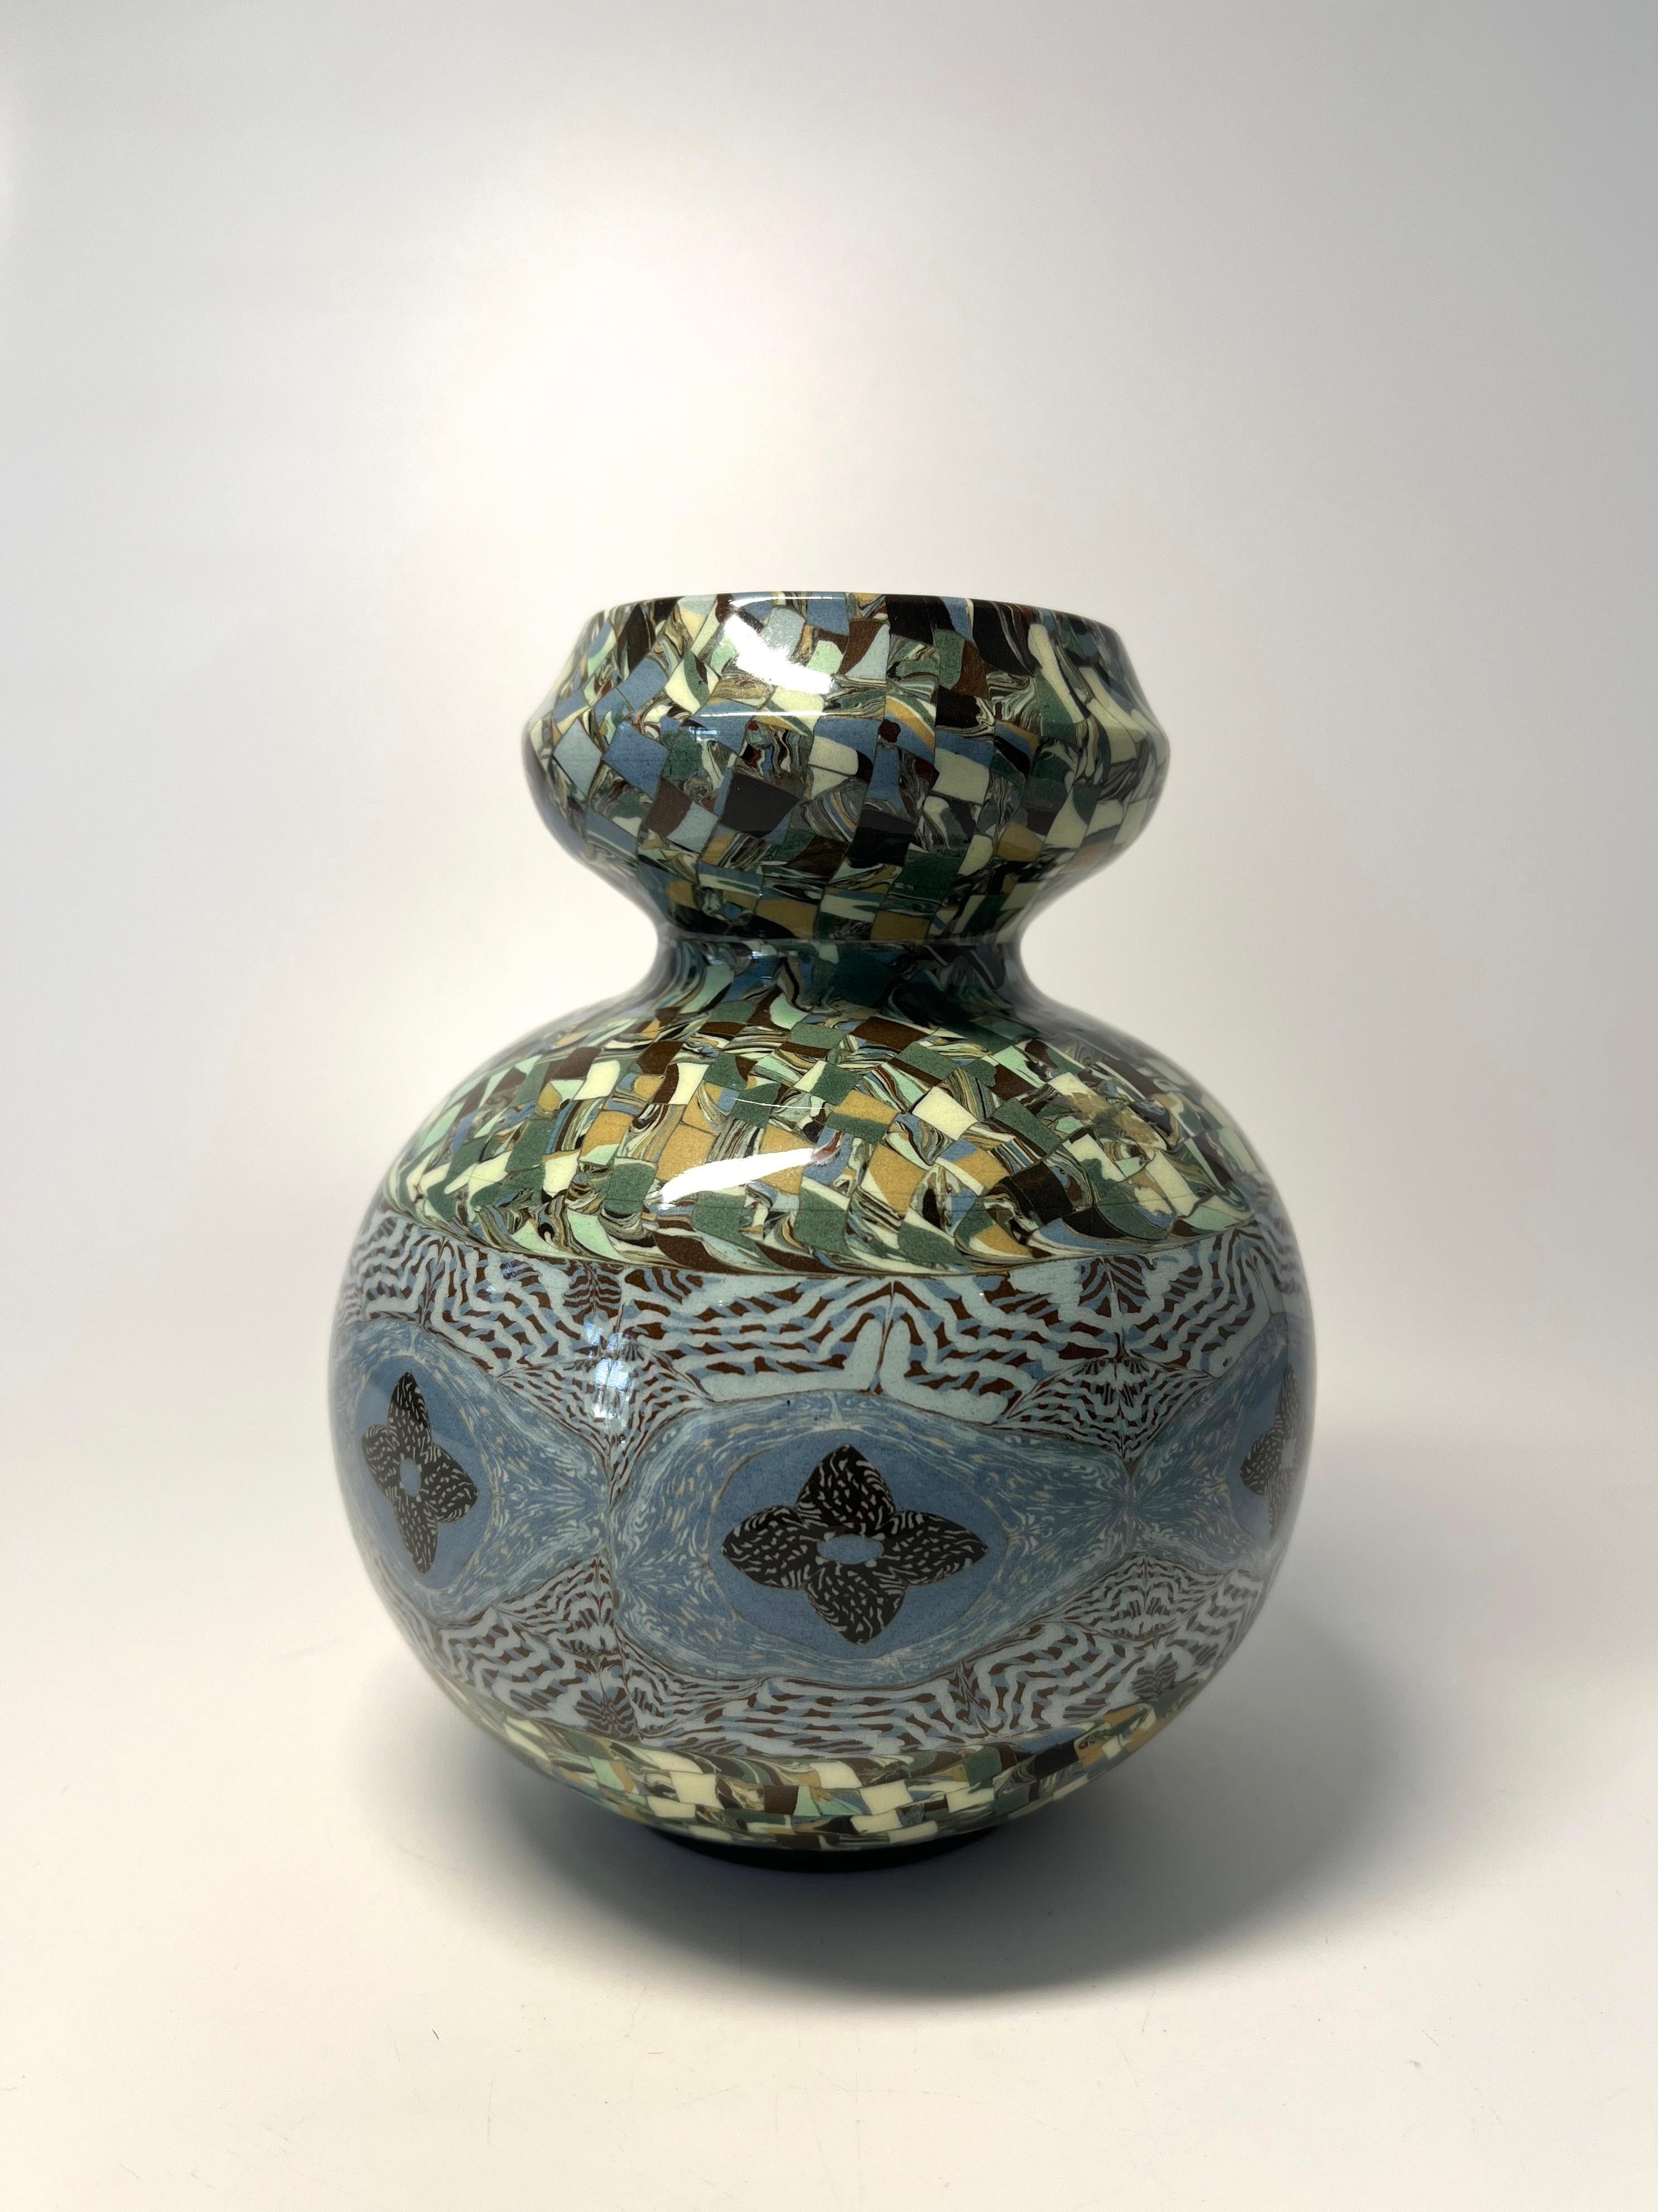 French Handsome Jean Gerbino, Vallauris, France, Ceramic Glazed Mosaic Shaped Vase 1960 For Sale